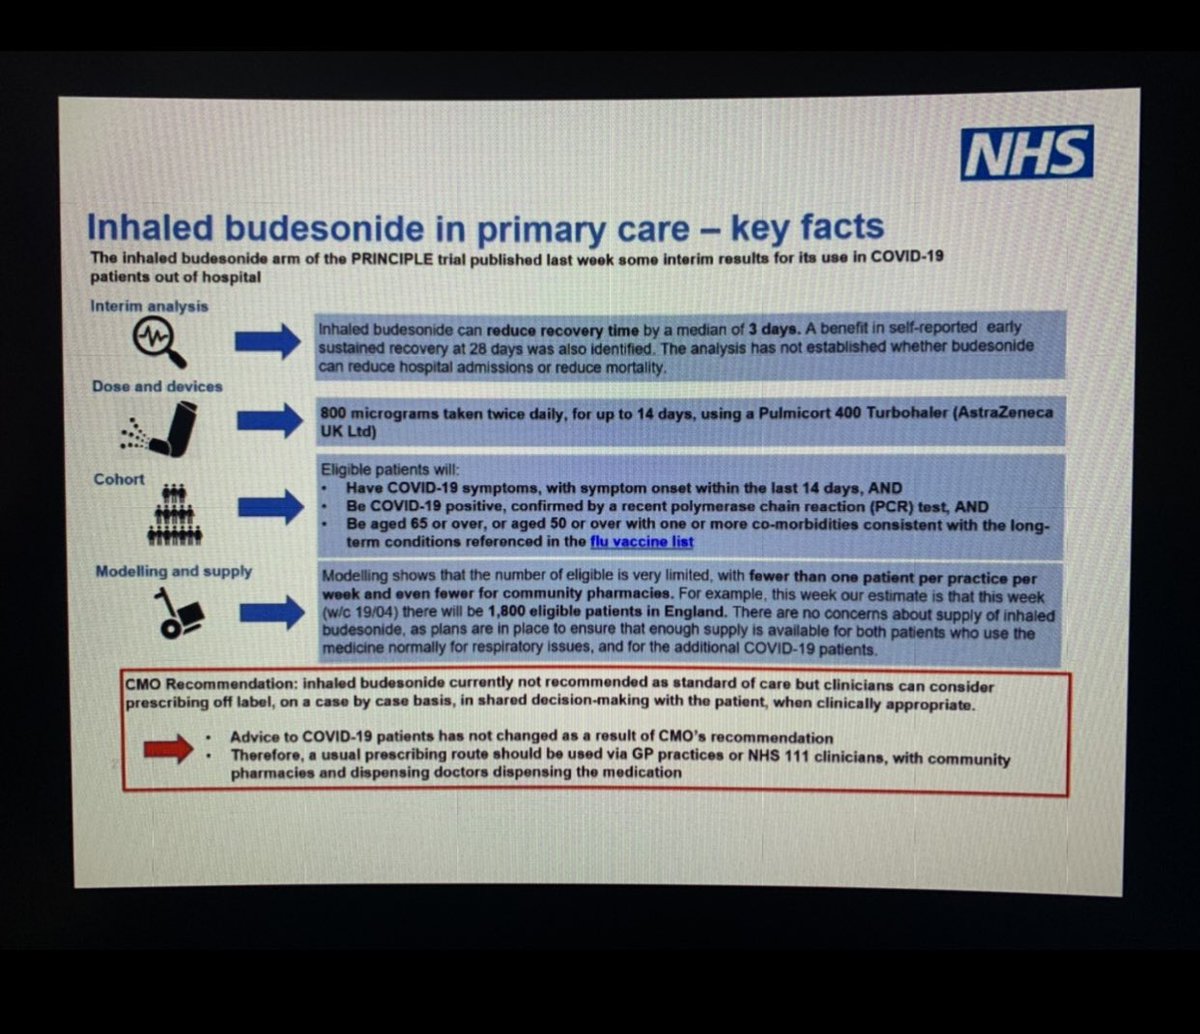 Listening into the ‘Inhaled Budesonide in CoVID-19’ @OxPrimaryCare @TrialPrinciple webinar. Incredible work done by the team, with the study showing  ‘Inhaled Budesonide can reduce recovery time by ... 3 days’ #Principletrial #COVID19